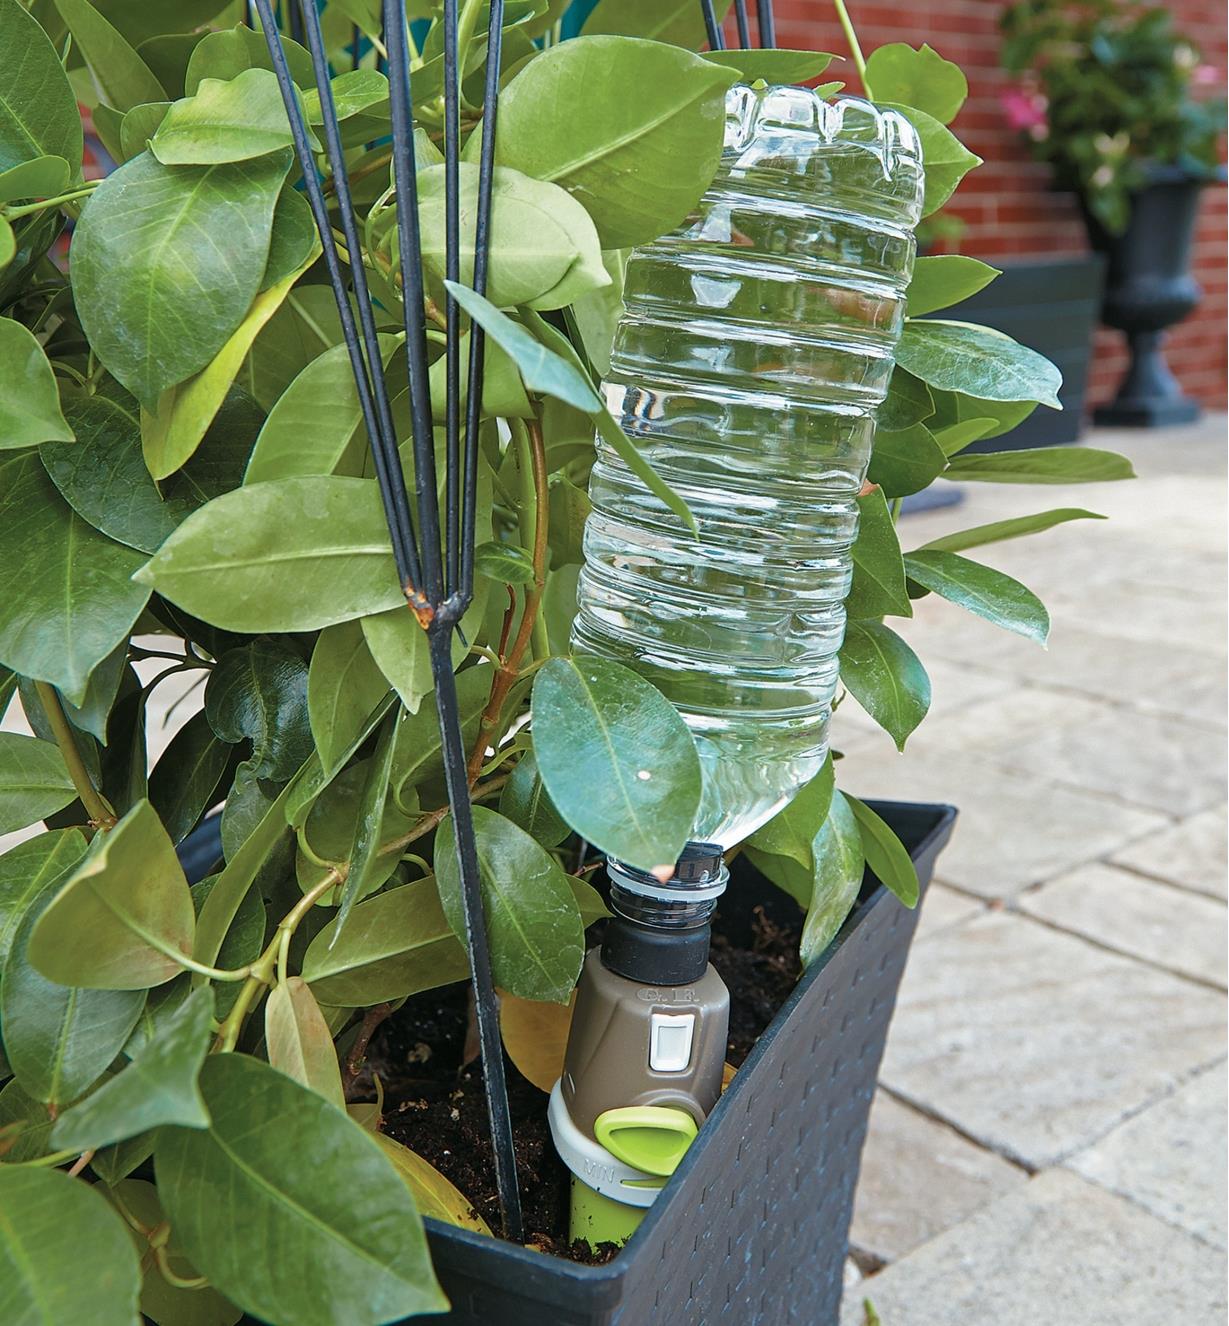 Adjustable-Flow Drip Spike with a water bottle attached inserted in a plant pot